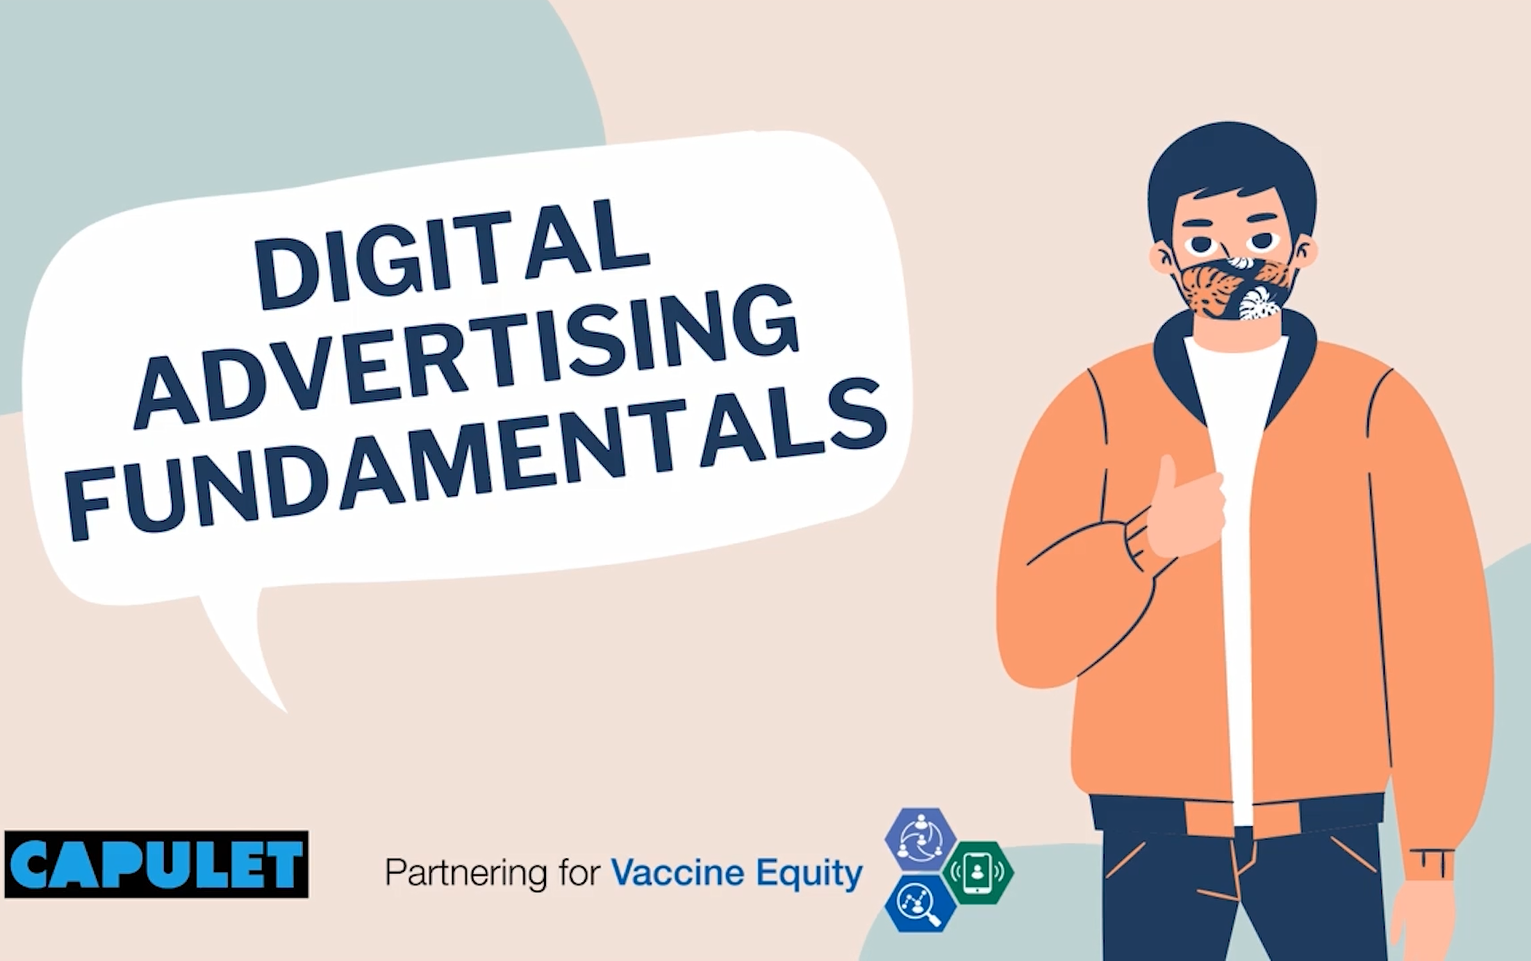 A still from a video called digital advertising fundamentals shows a man wearing a mask. Capulet and Partnering for Vaccine Equity logos are a the bottom.